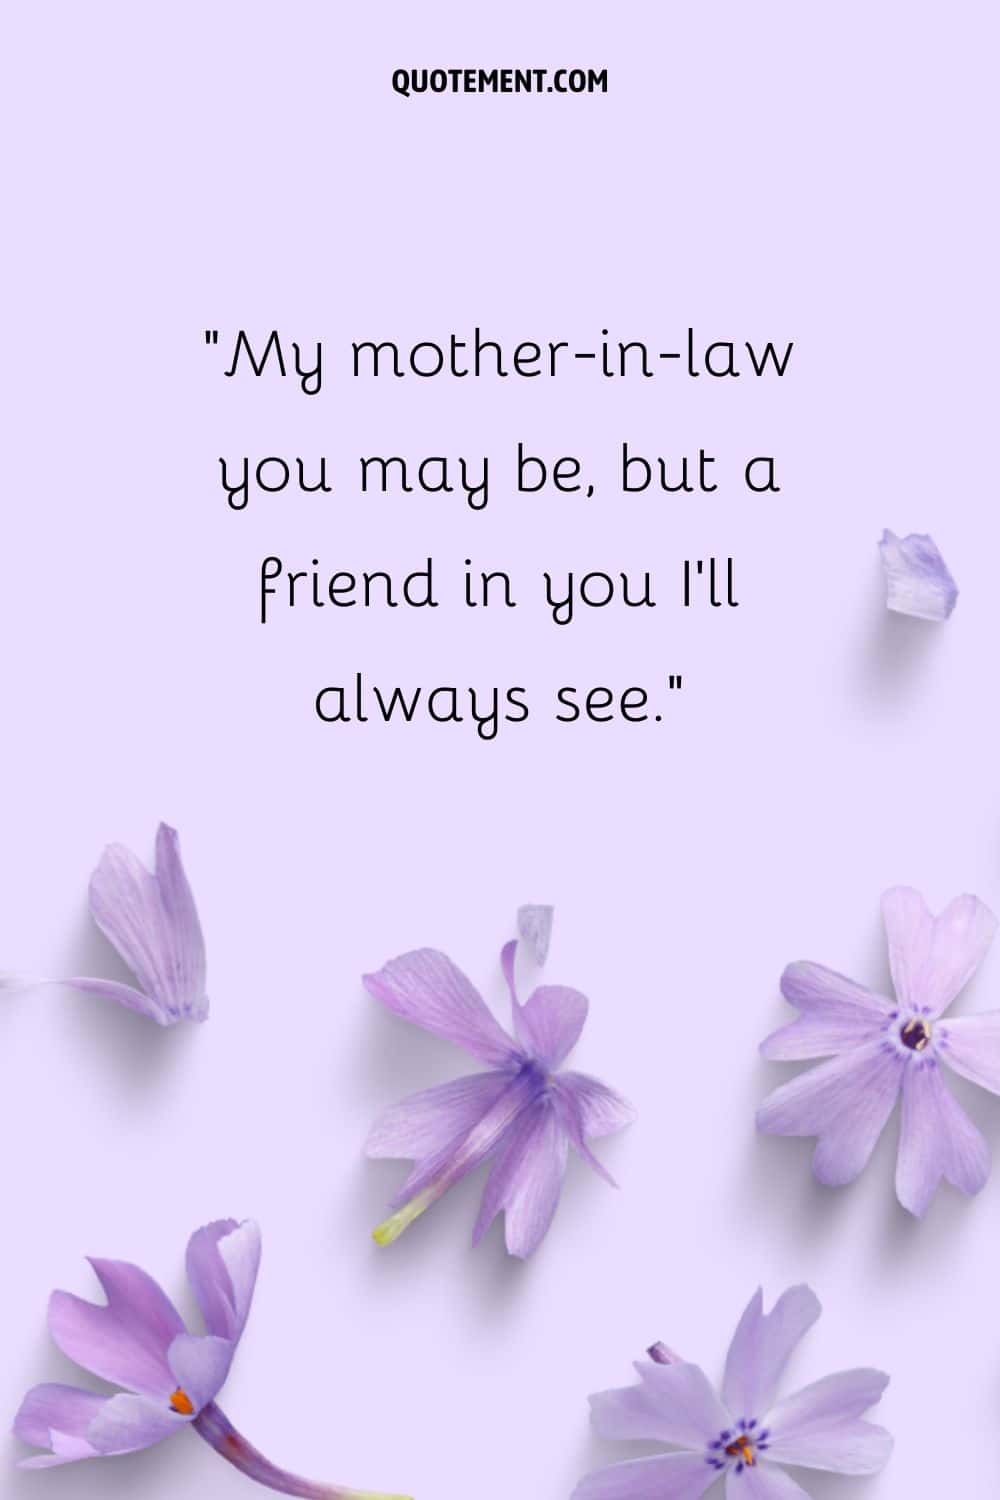 Vivid purple flowers complement an uplifting quote.